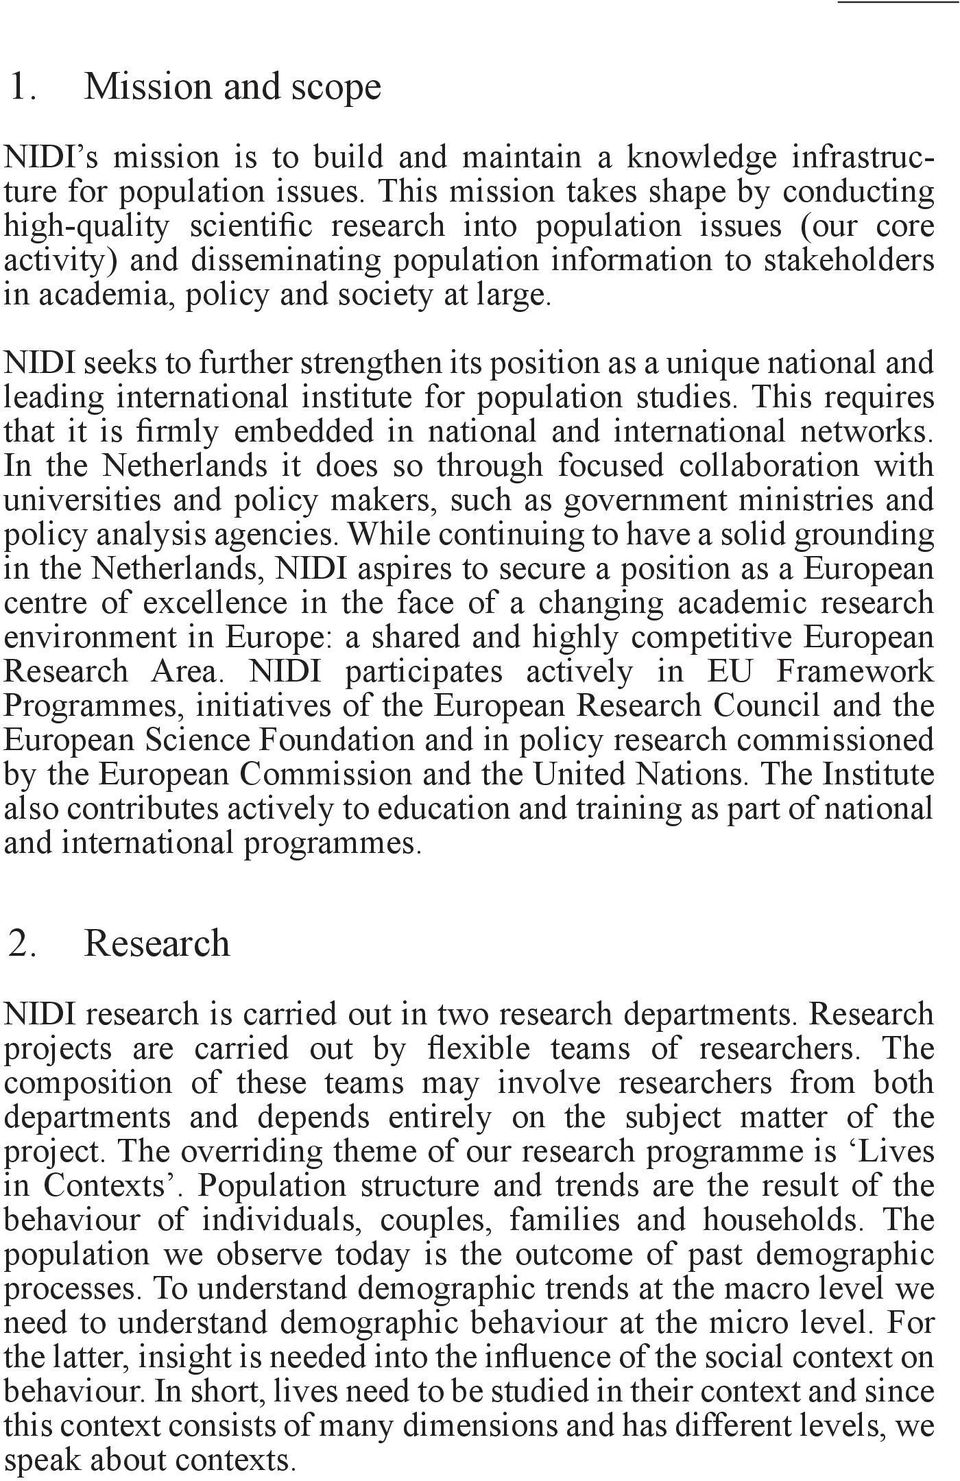 society at large. NIDI seeks to further strengthen its position as a unique national and leading international institute for population studies.